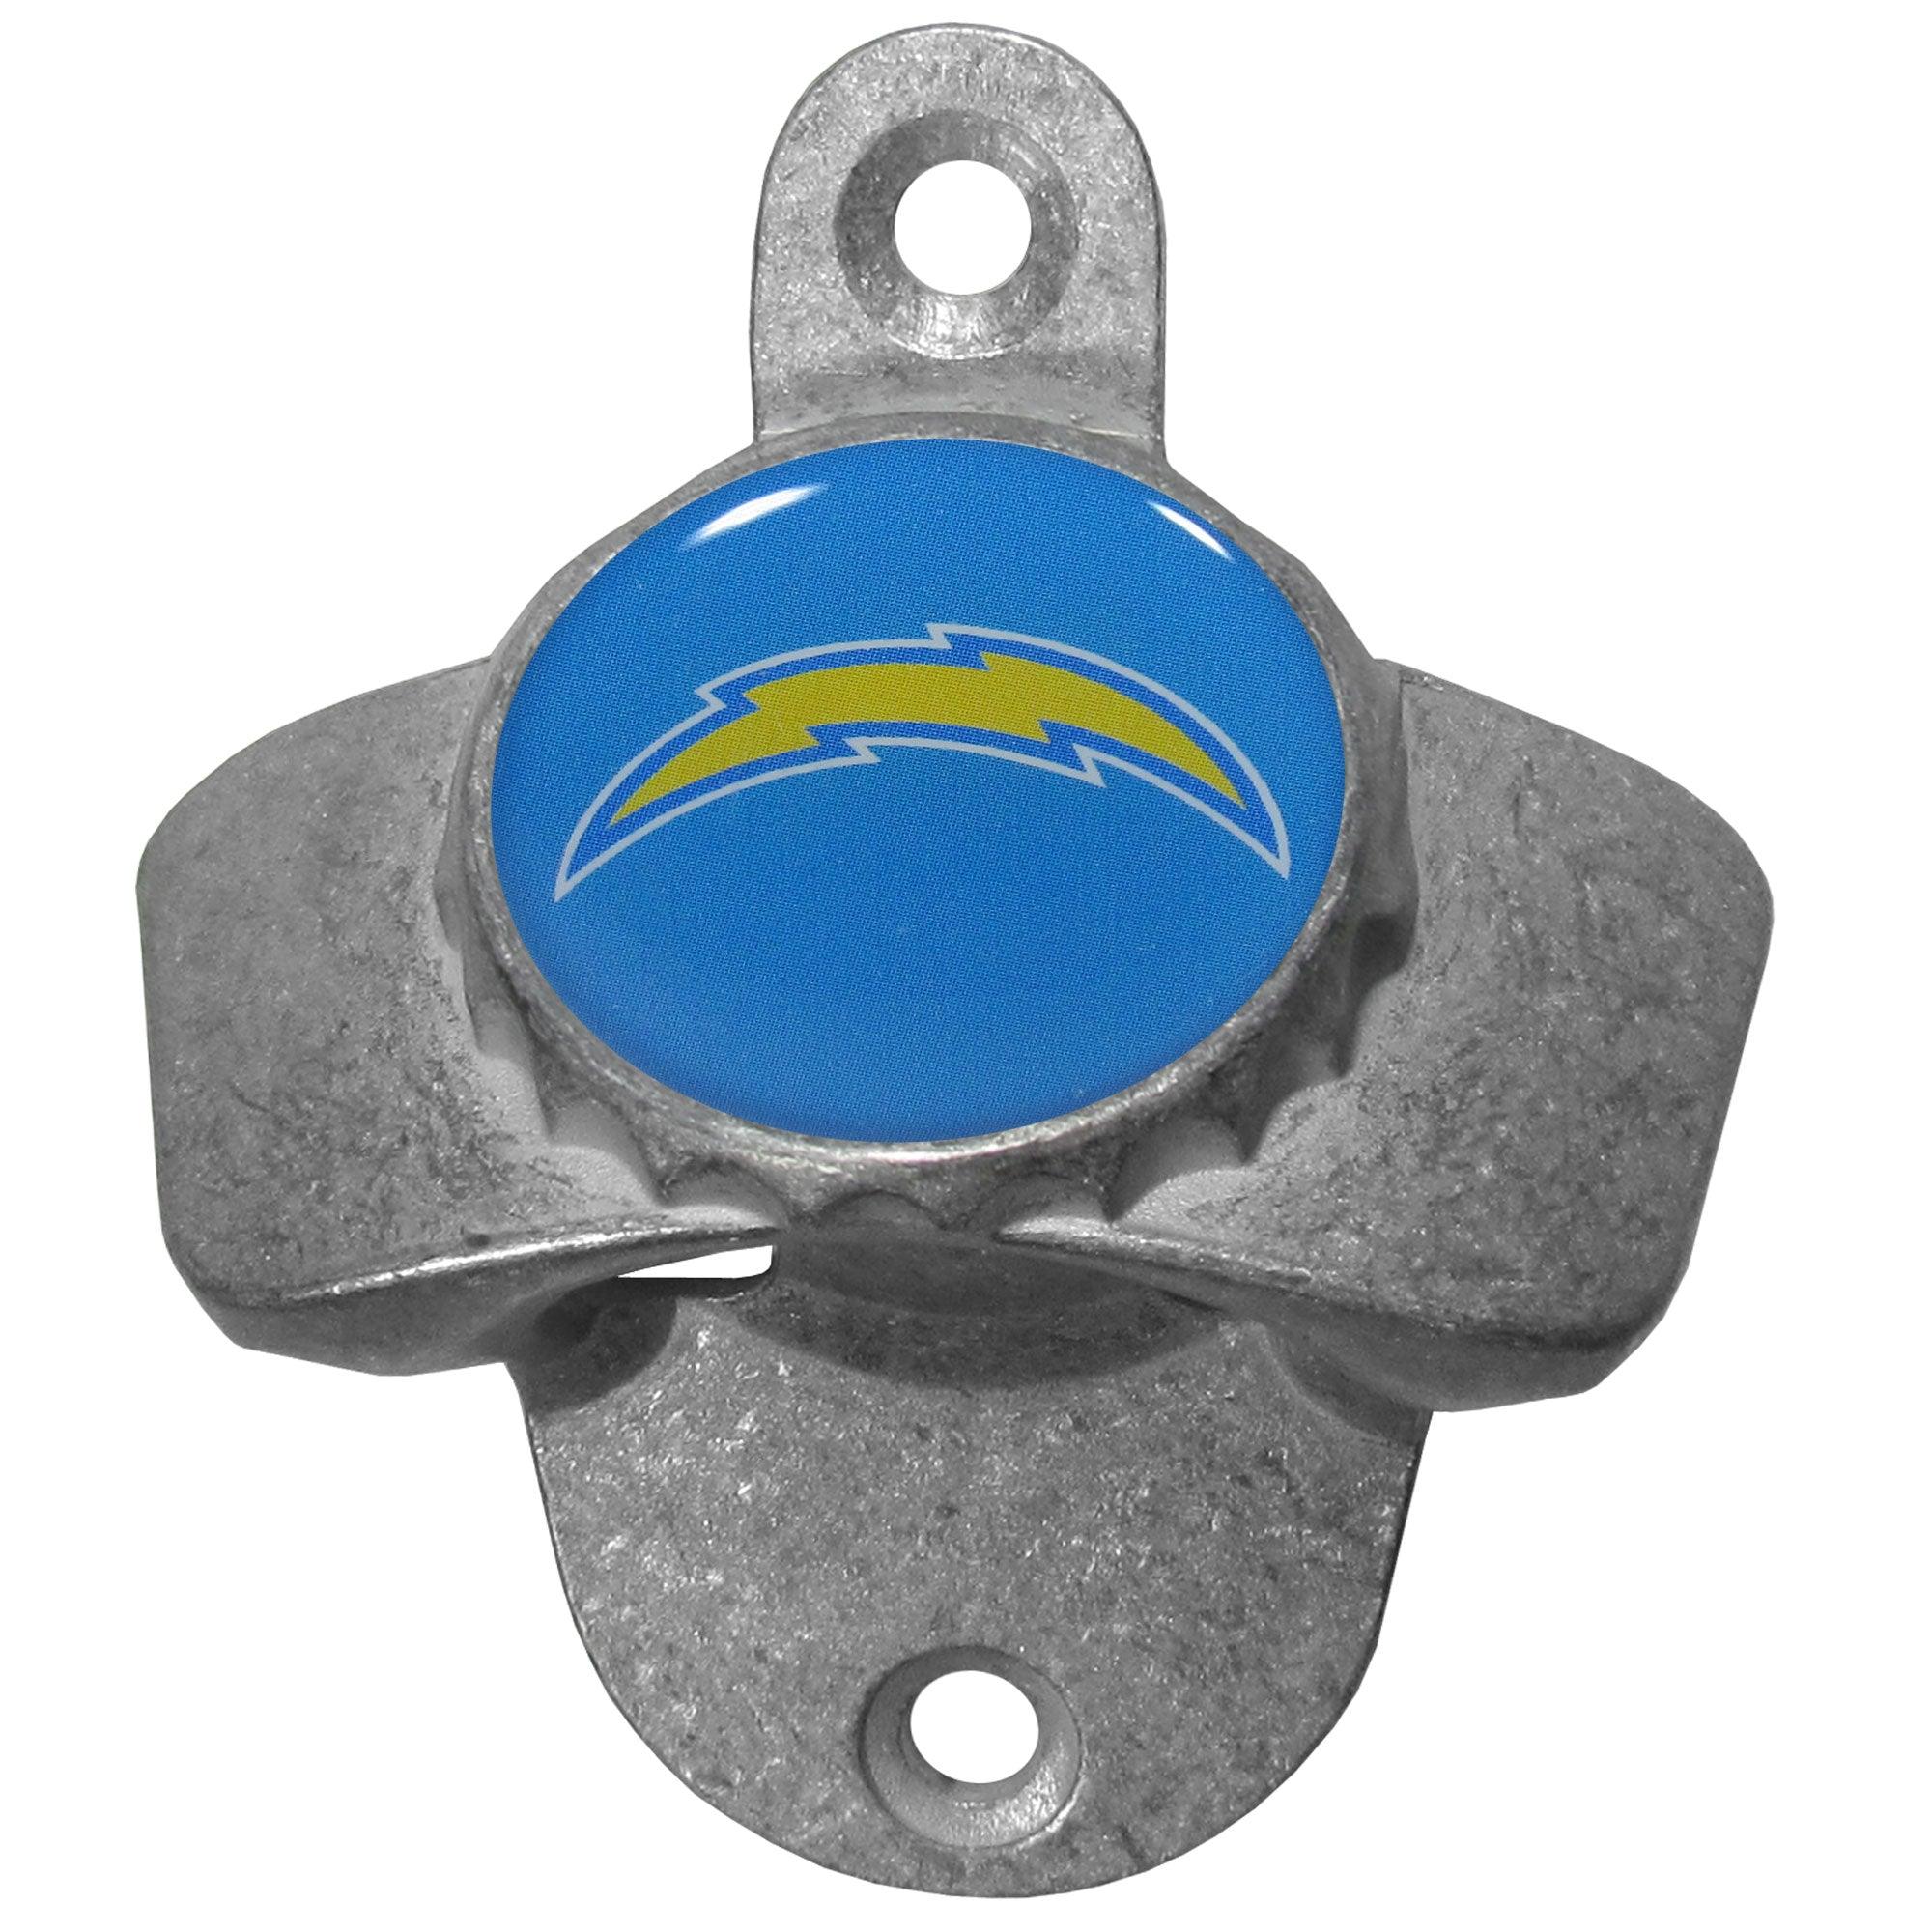 Los Angeles Chargers Wall Mounted Bottle Opener - Flyclothing LLC